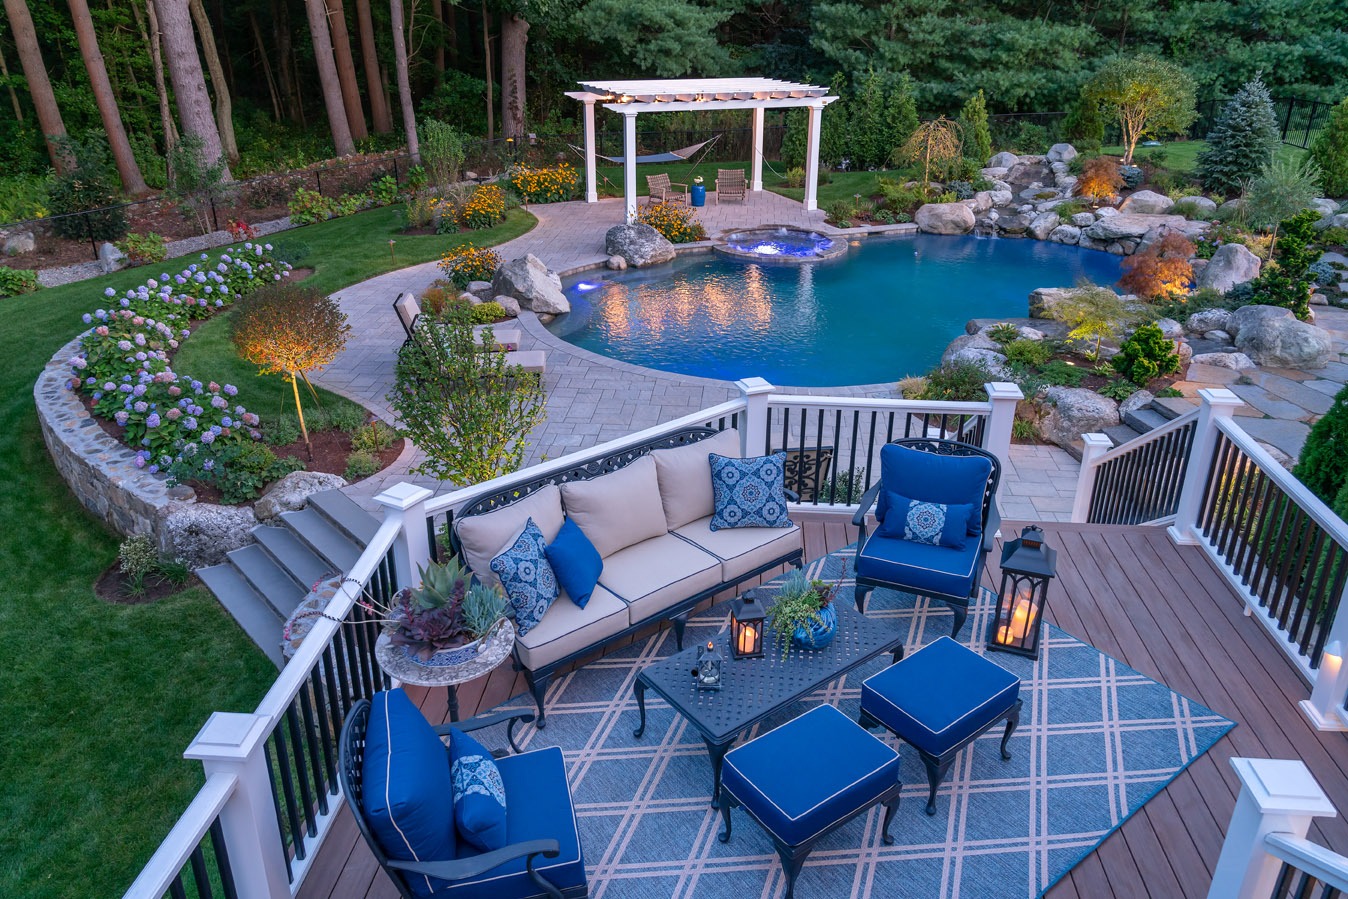 A luxurious backyard with a well-lit, curved pool, pergola, landscaped garden, and a deck with comfortable outdoor furniture and decorative cushions.